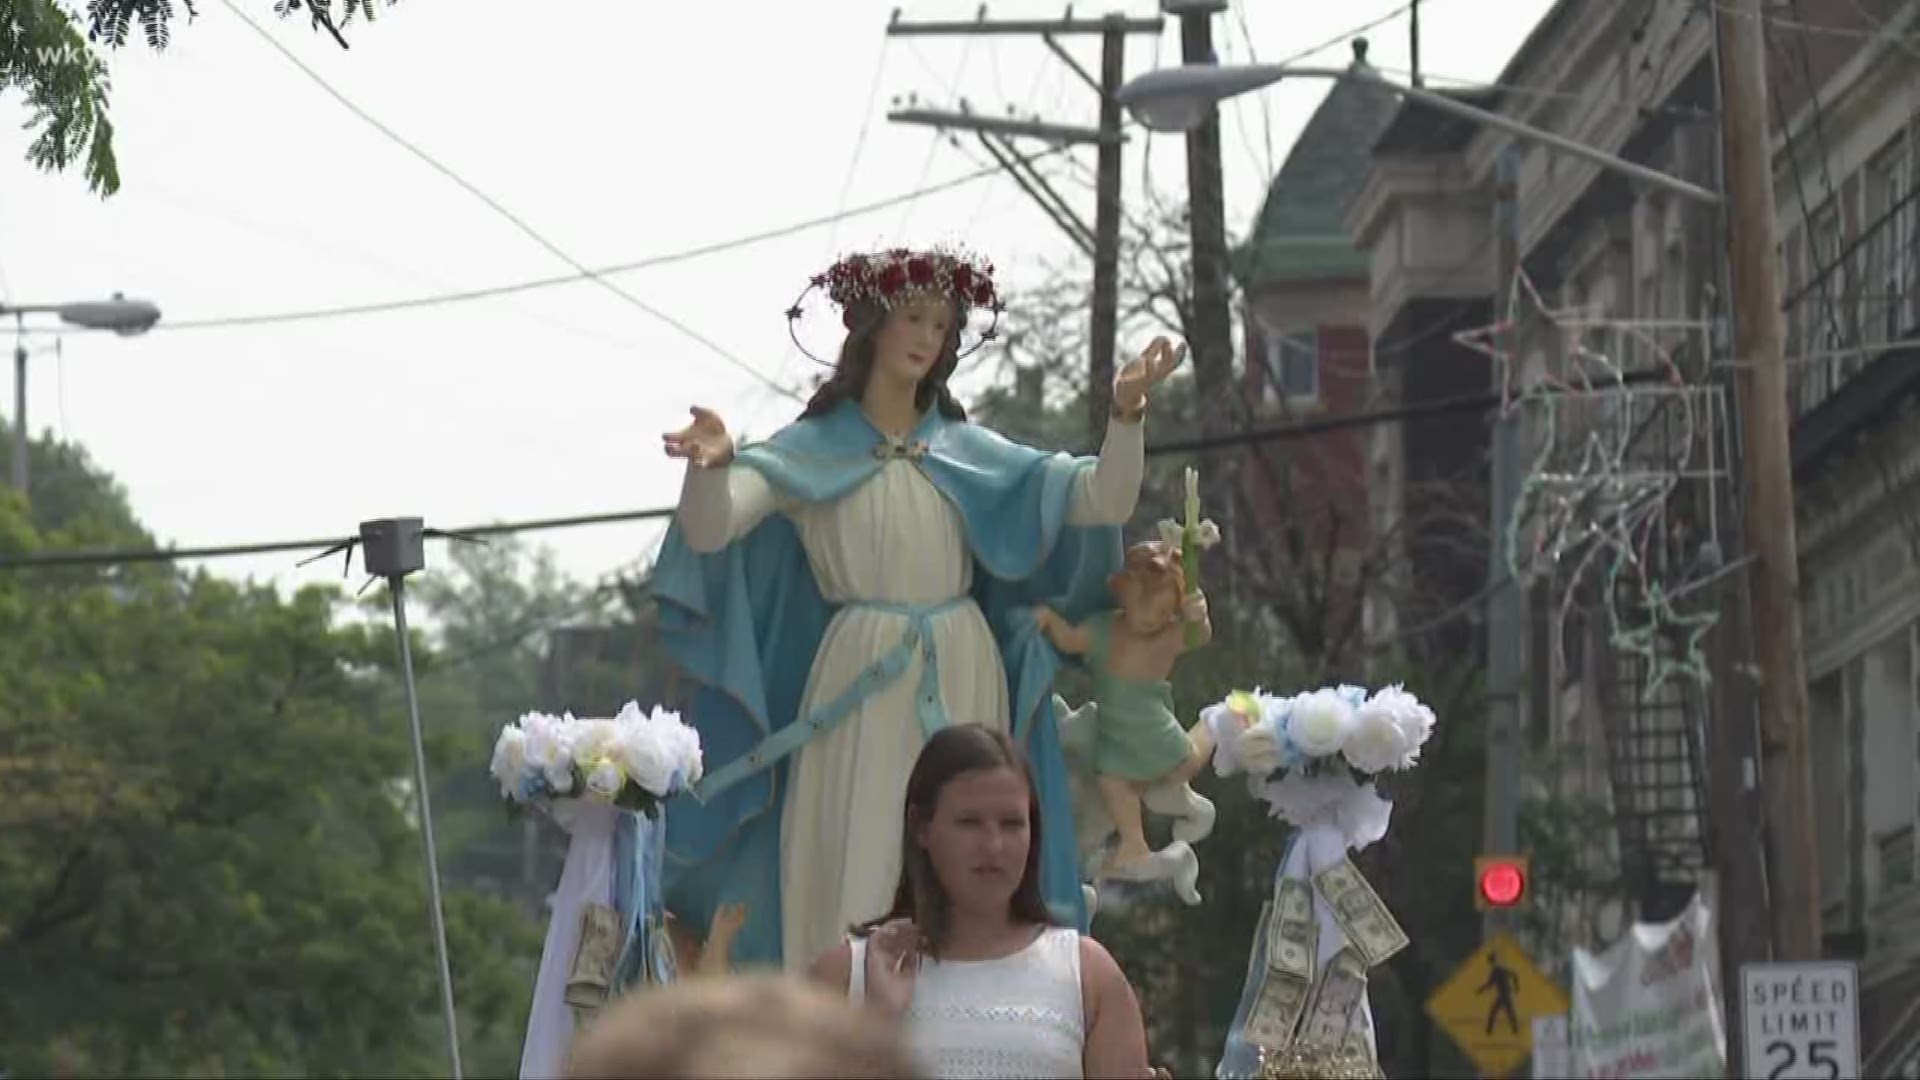 Feast of the Assumption is underway 